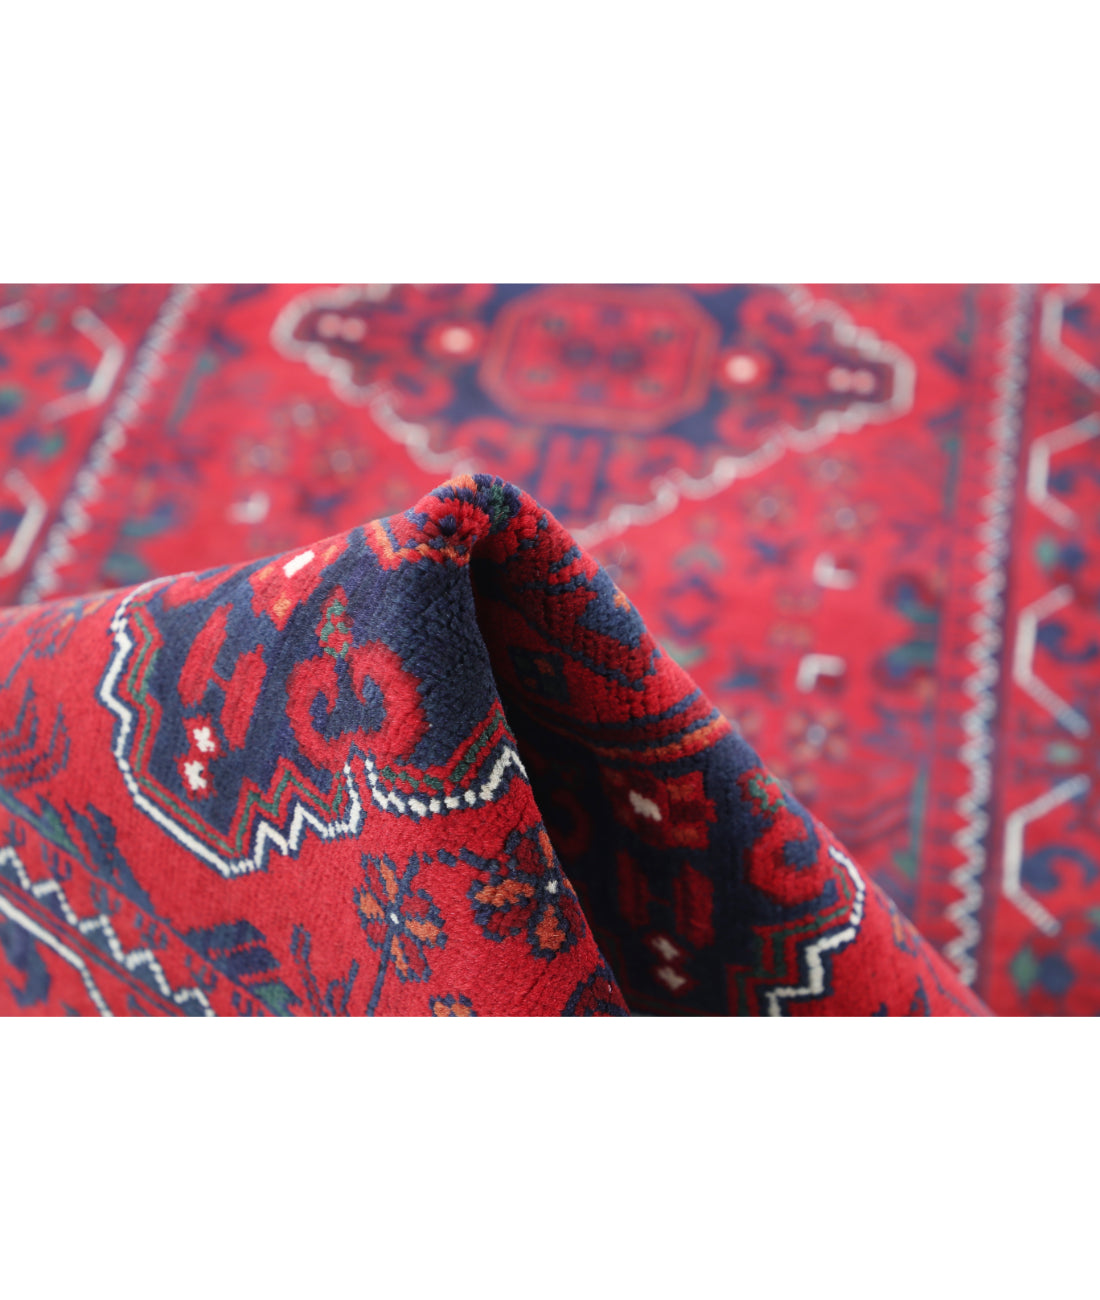 Hand Knotted Afghan Khamyab Wool Rug - 2'6'' x 9'0'' 2'6'' x 9'0'' (75 X 270) / Red / Red